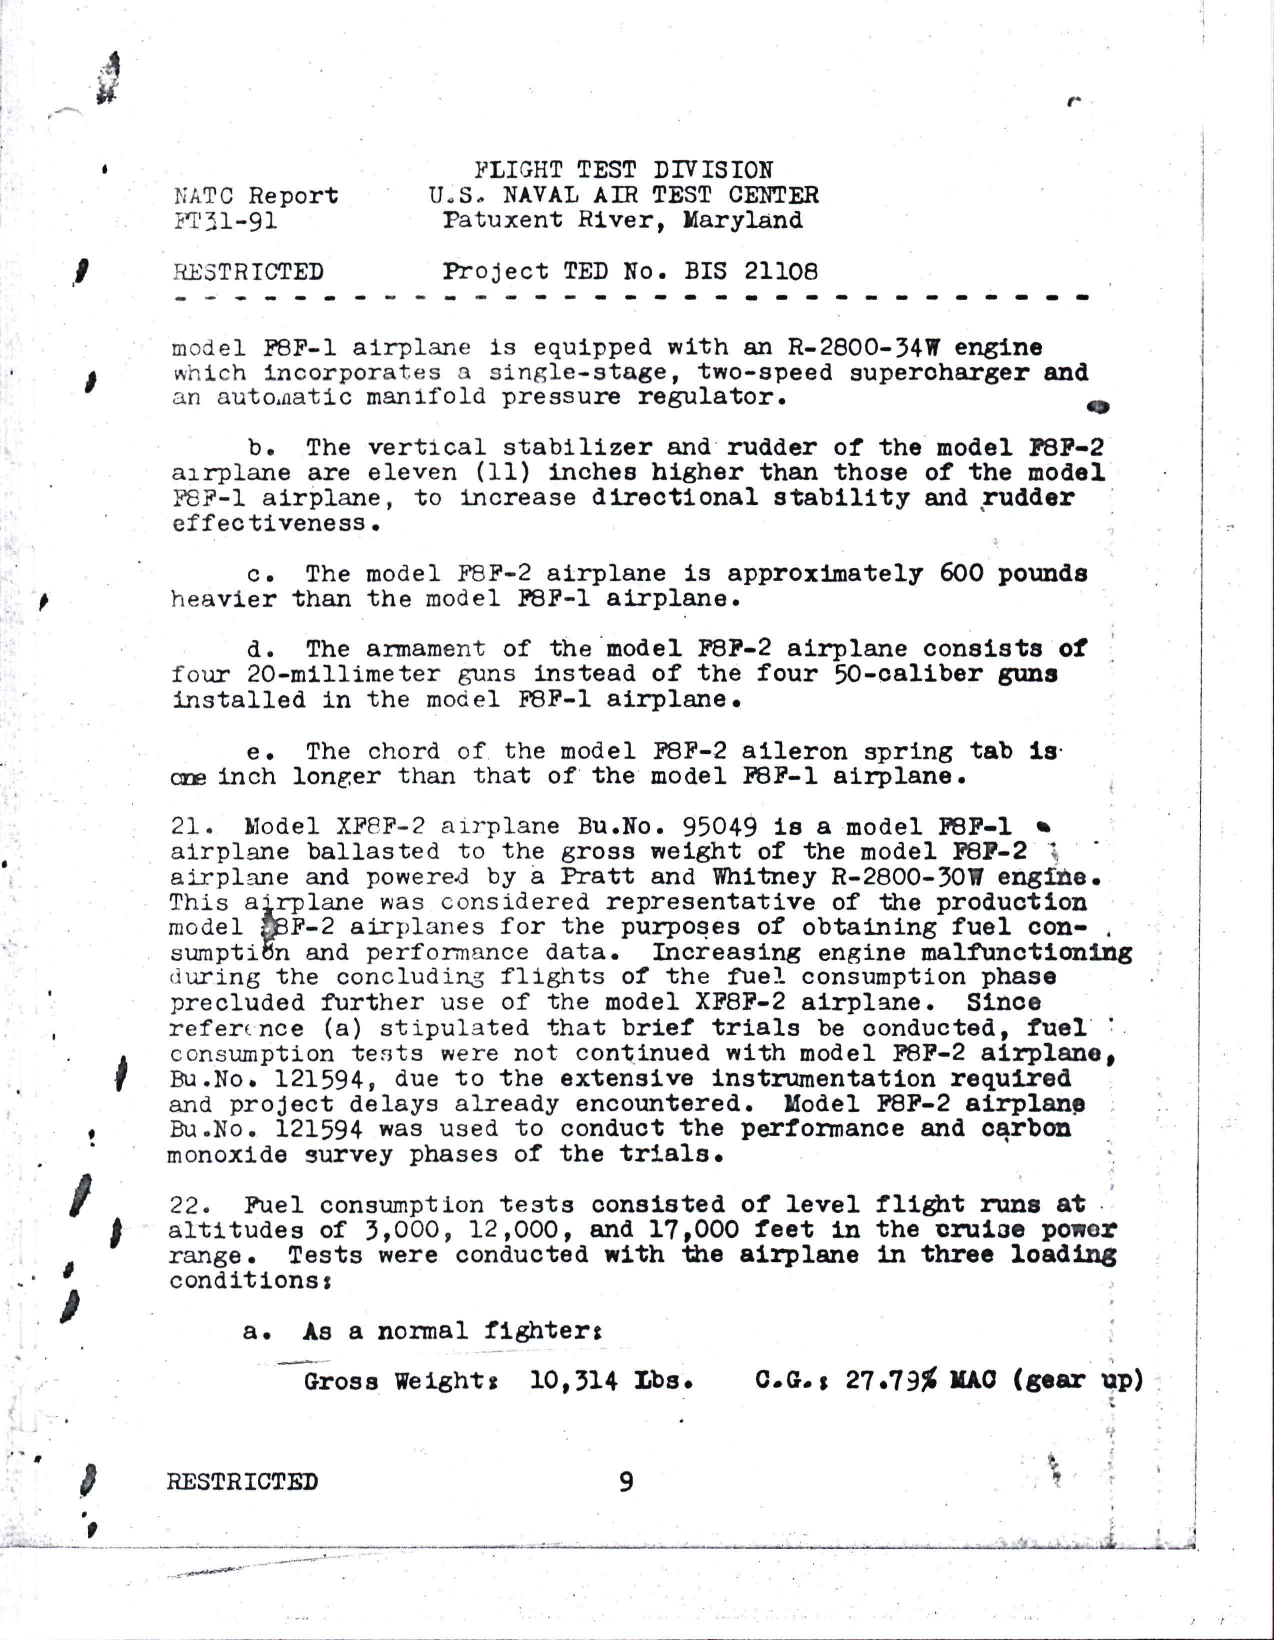 Sample page 9 from AirCorps Library document: Report of Flight Test Division - Service Acceptance Trials Final Report on F8F-2